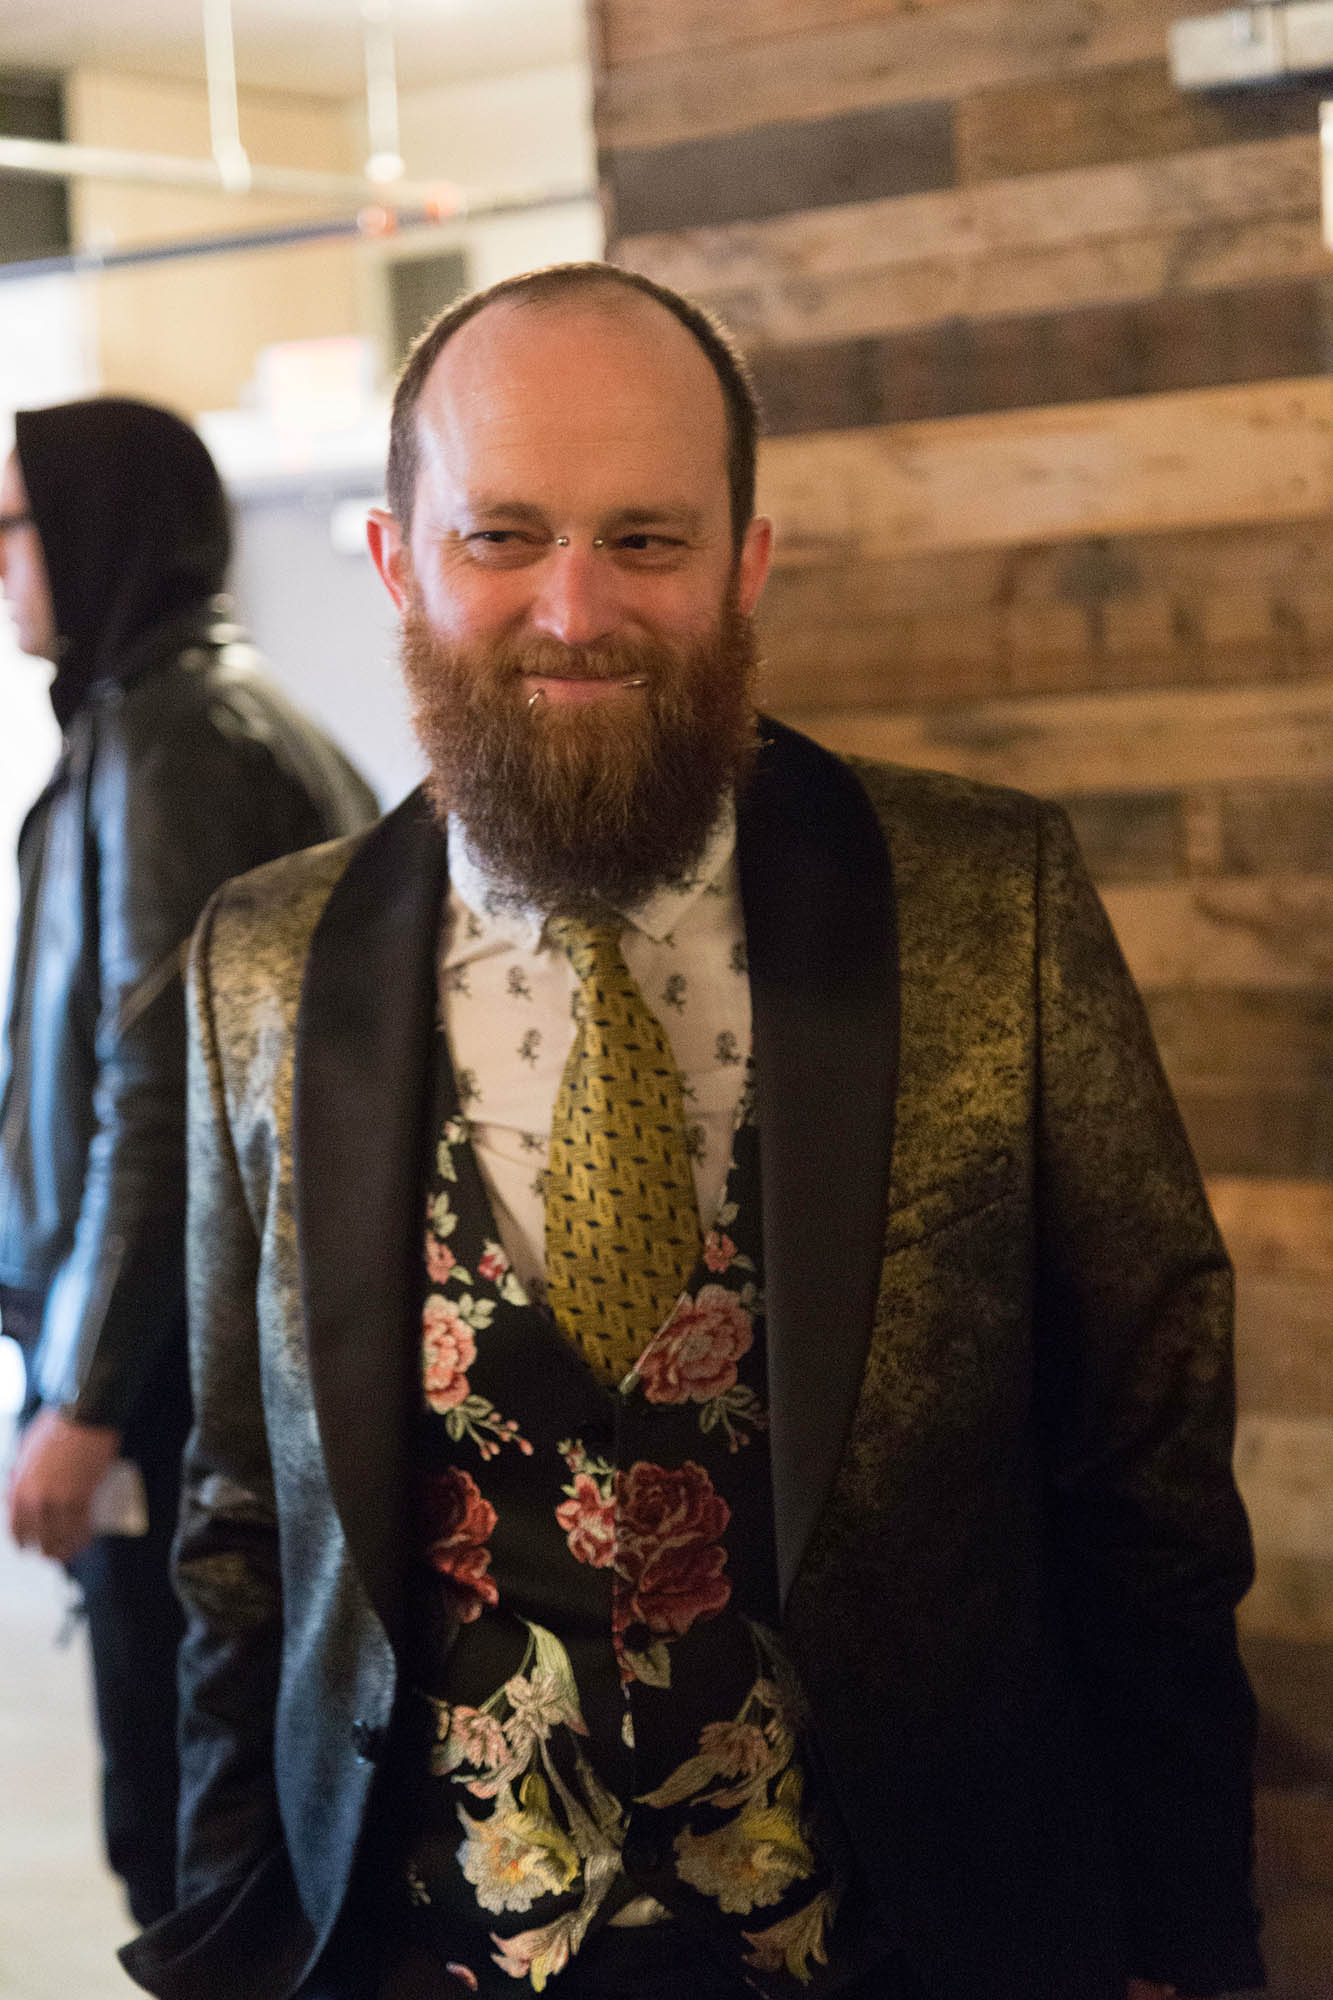 Groom with Beard and Facial Piercings Wearing Gold Floral Vest and Suit Jacket